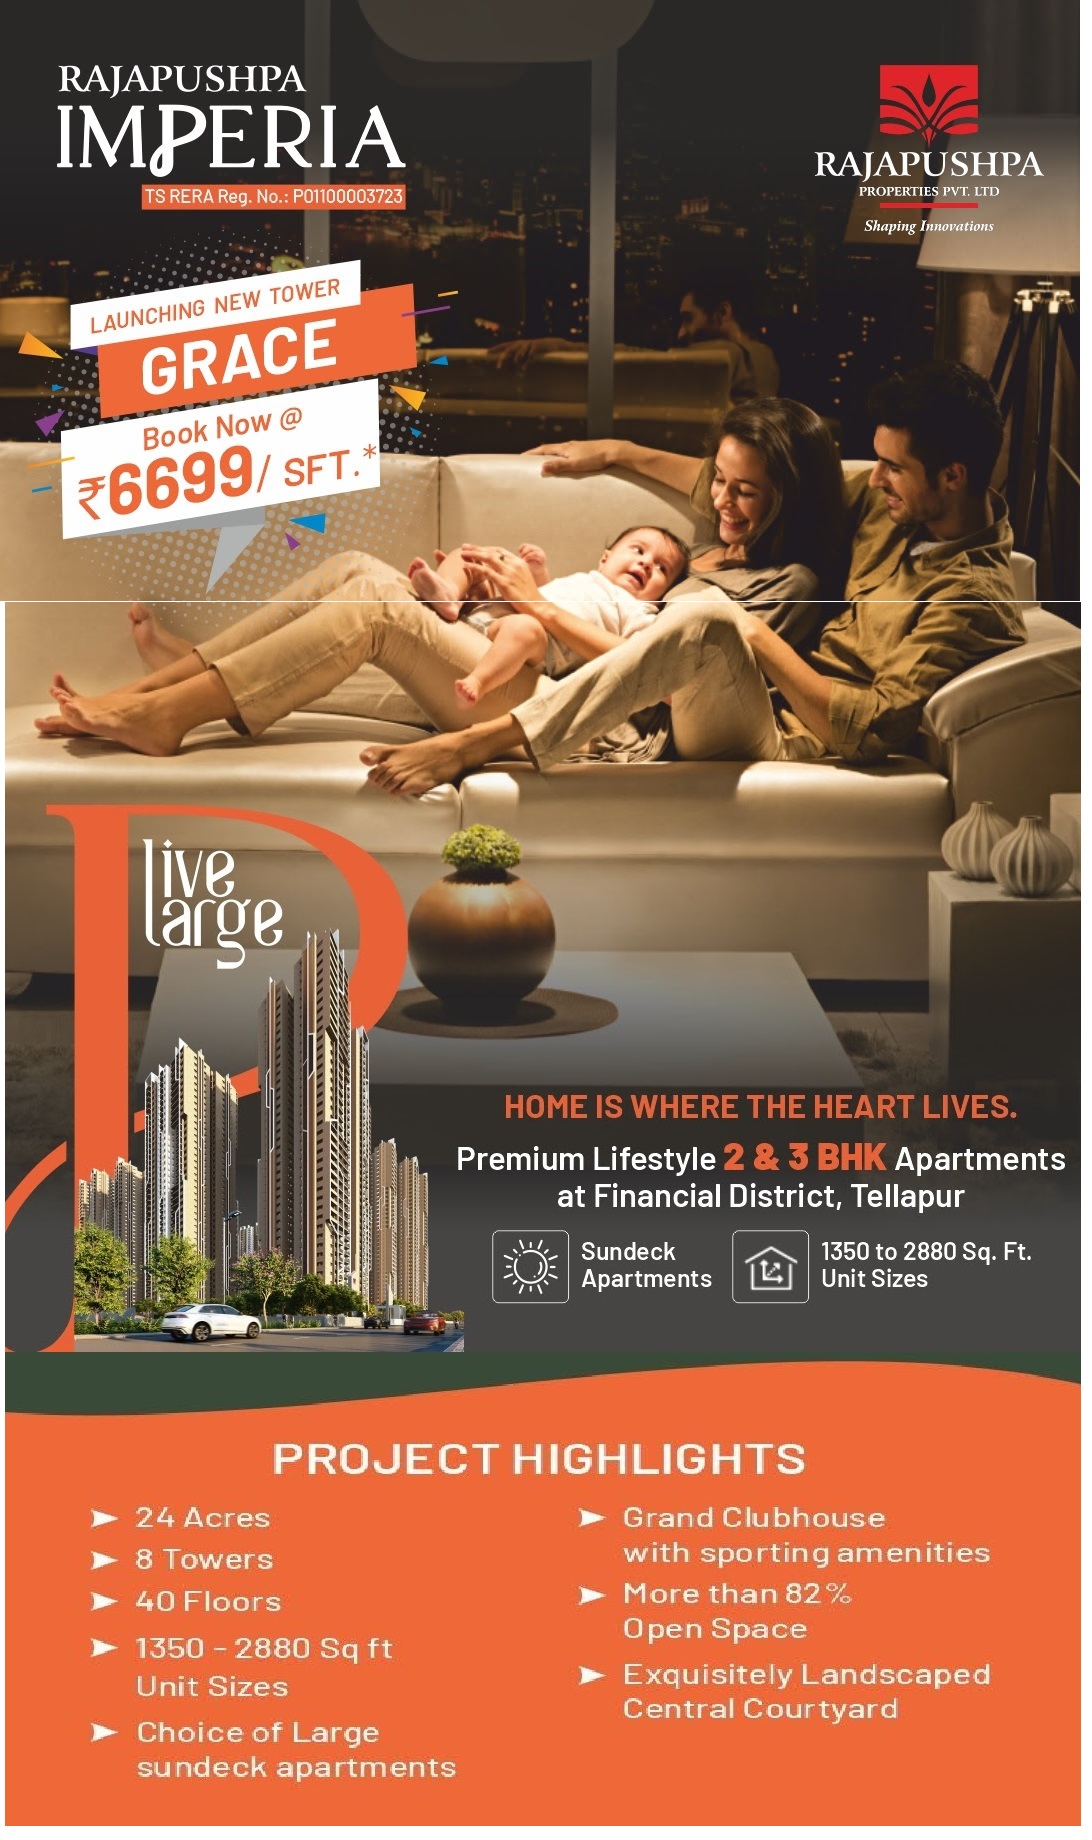 Launching new tower grace book now Rs 6699 per sqft at Rajapushpa Imperia, Hyderabad Update